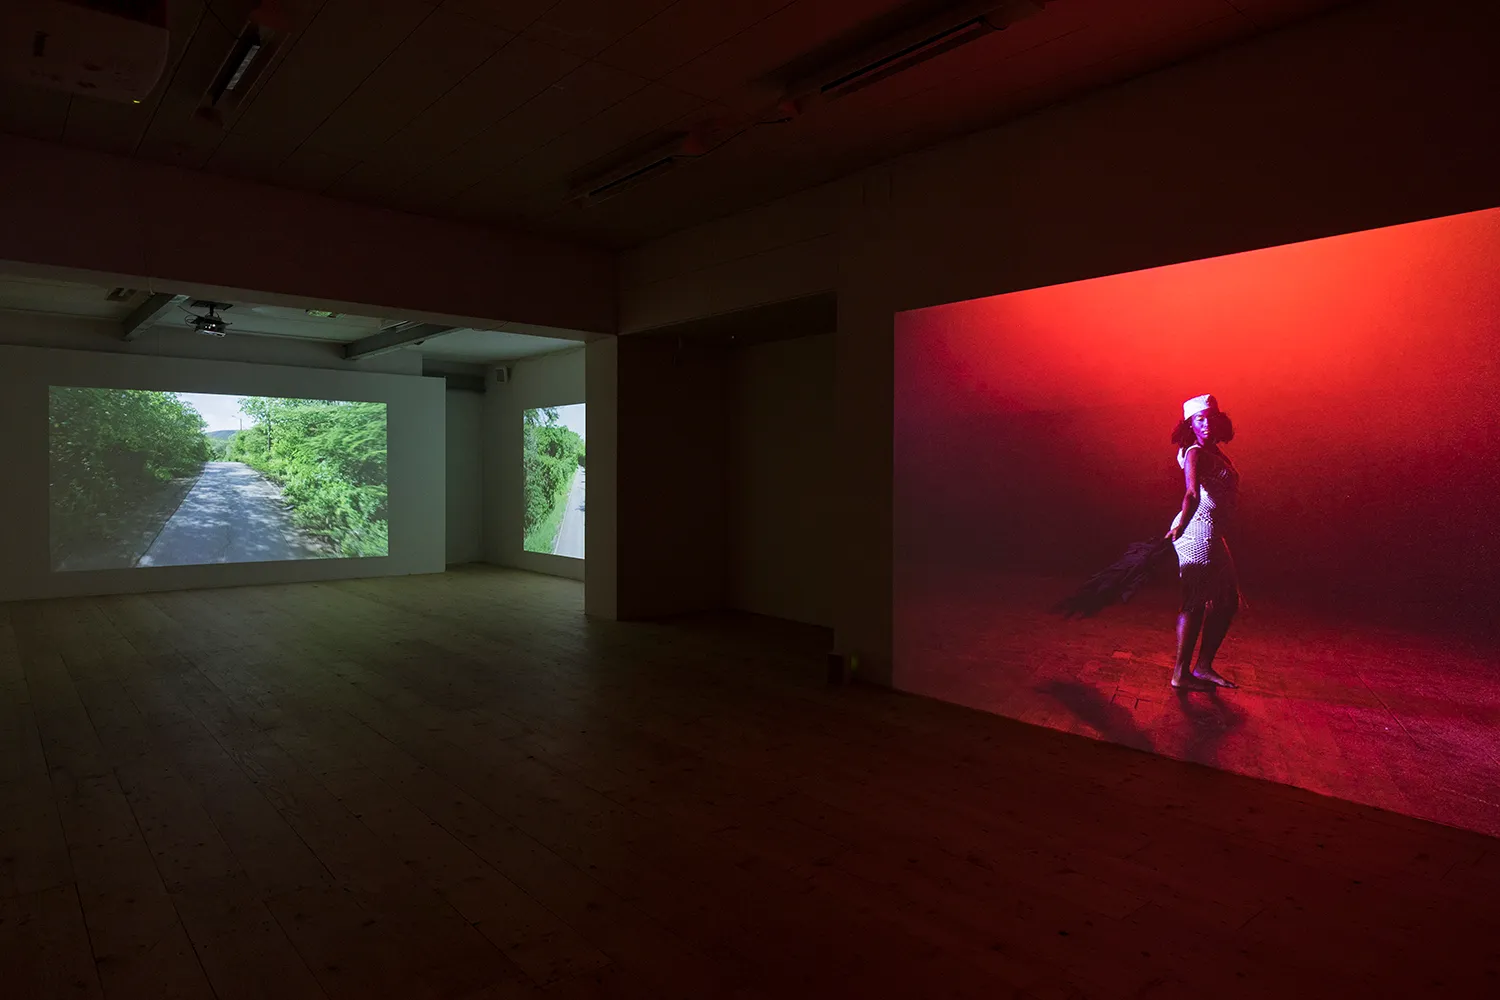 3 projections on different walls of an empty gallery space, two with vegetation and a road; another one with a figure dressed in white, surrounded by a vibrant red glow